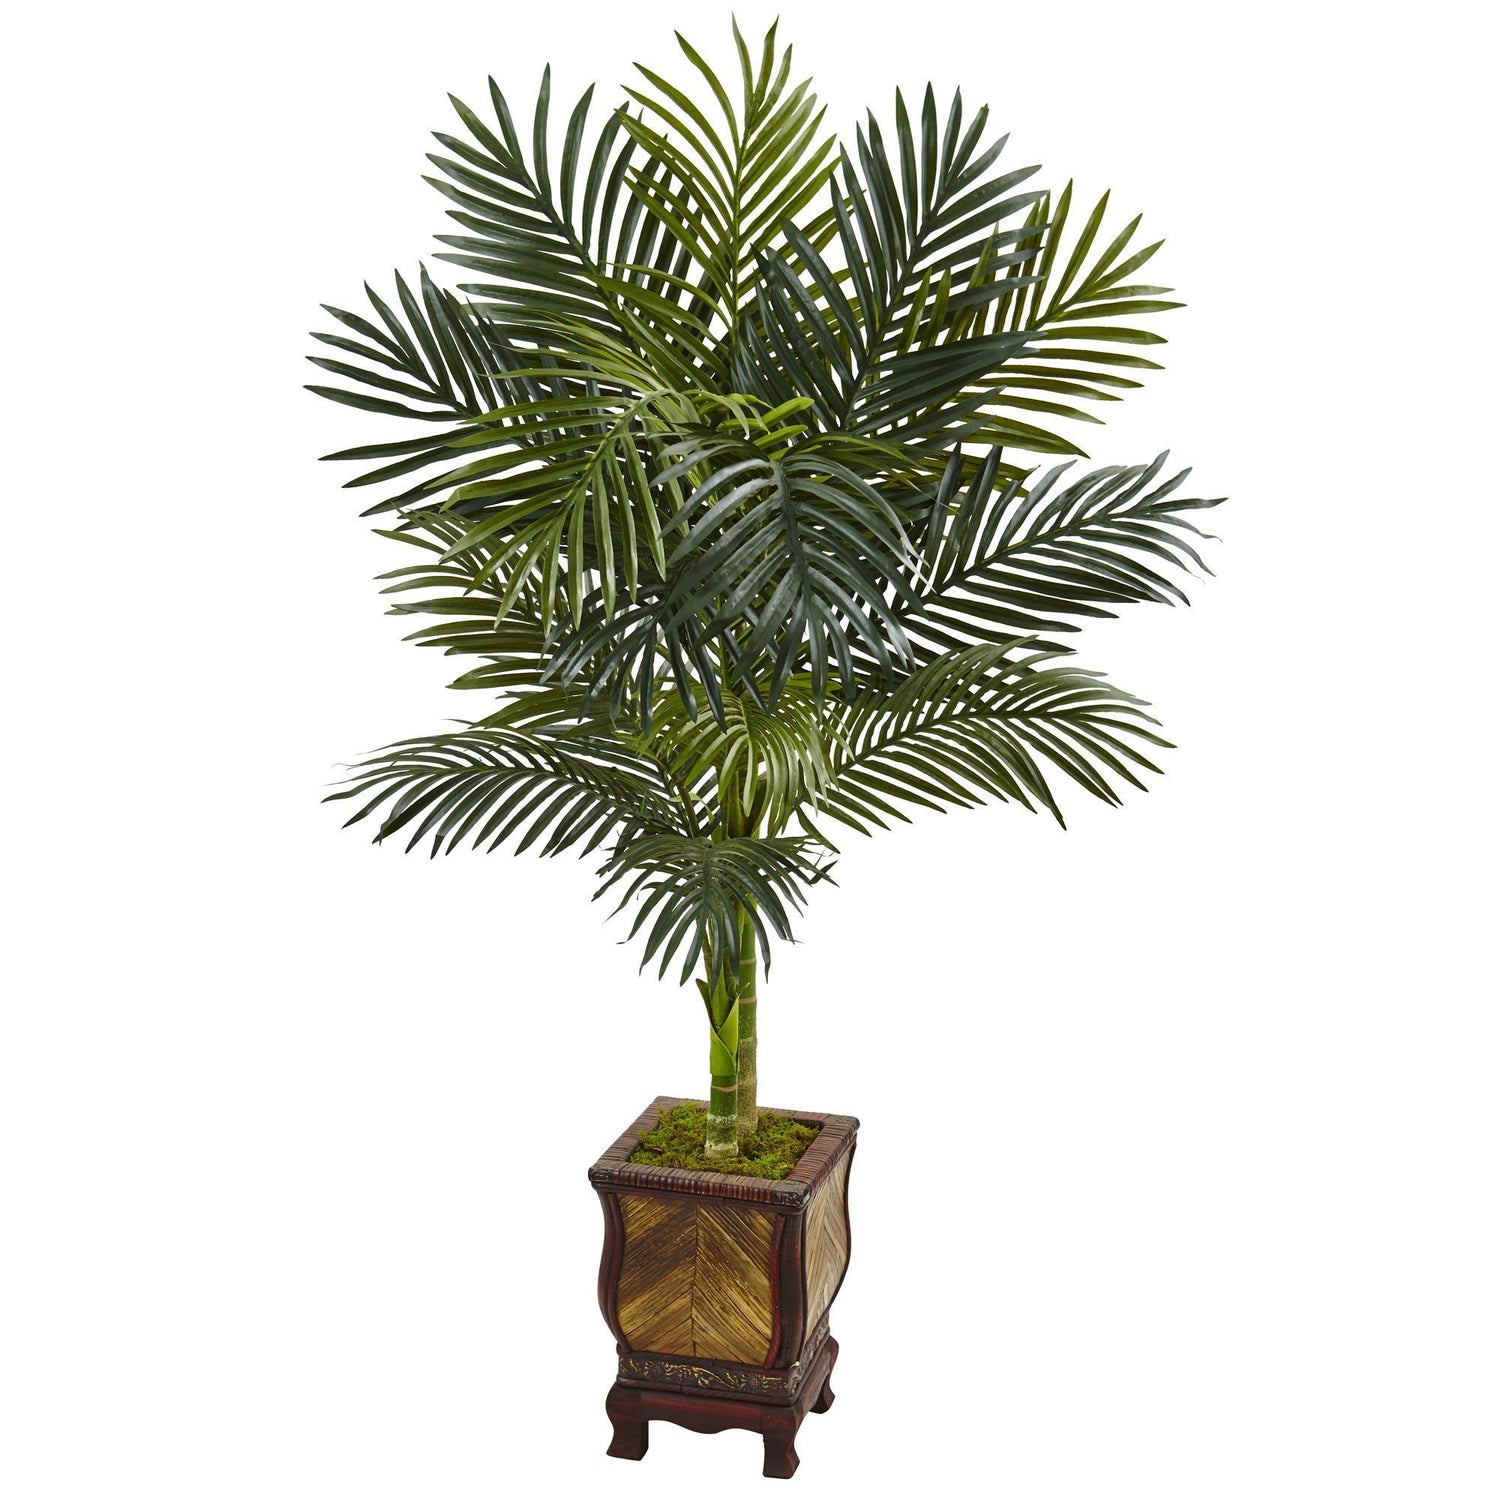 4.5’ Golden Cane Palm Tree in Wooden Decorated Planter